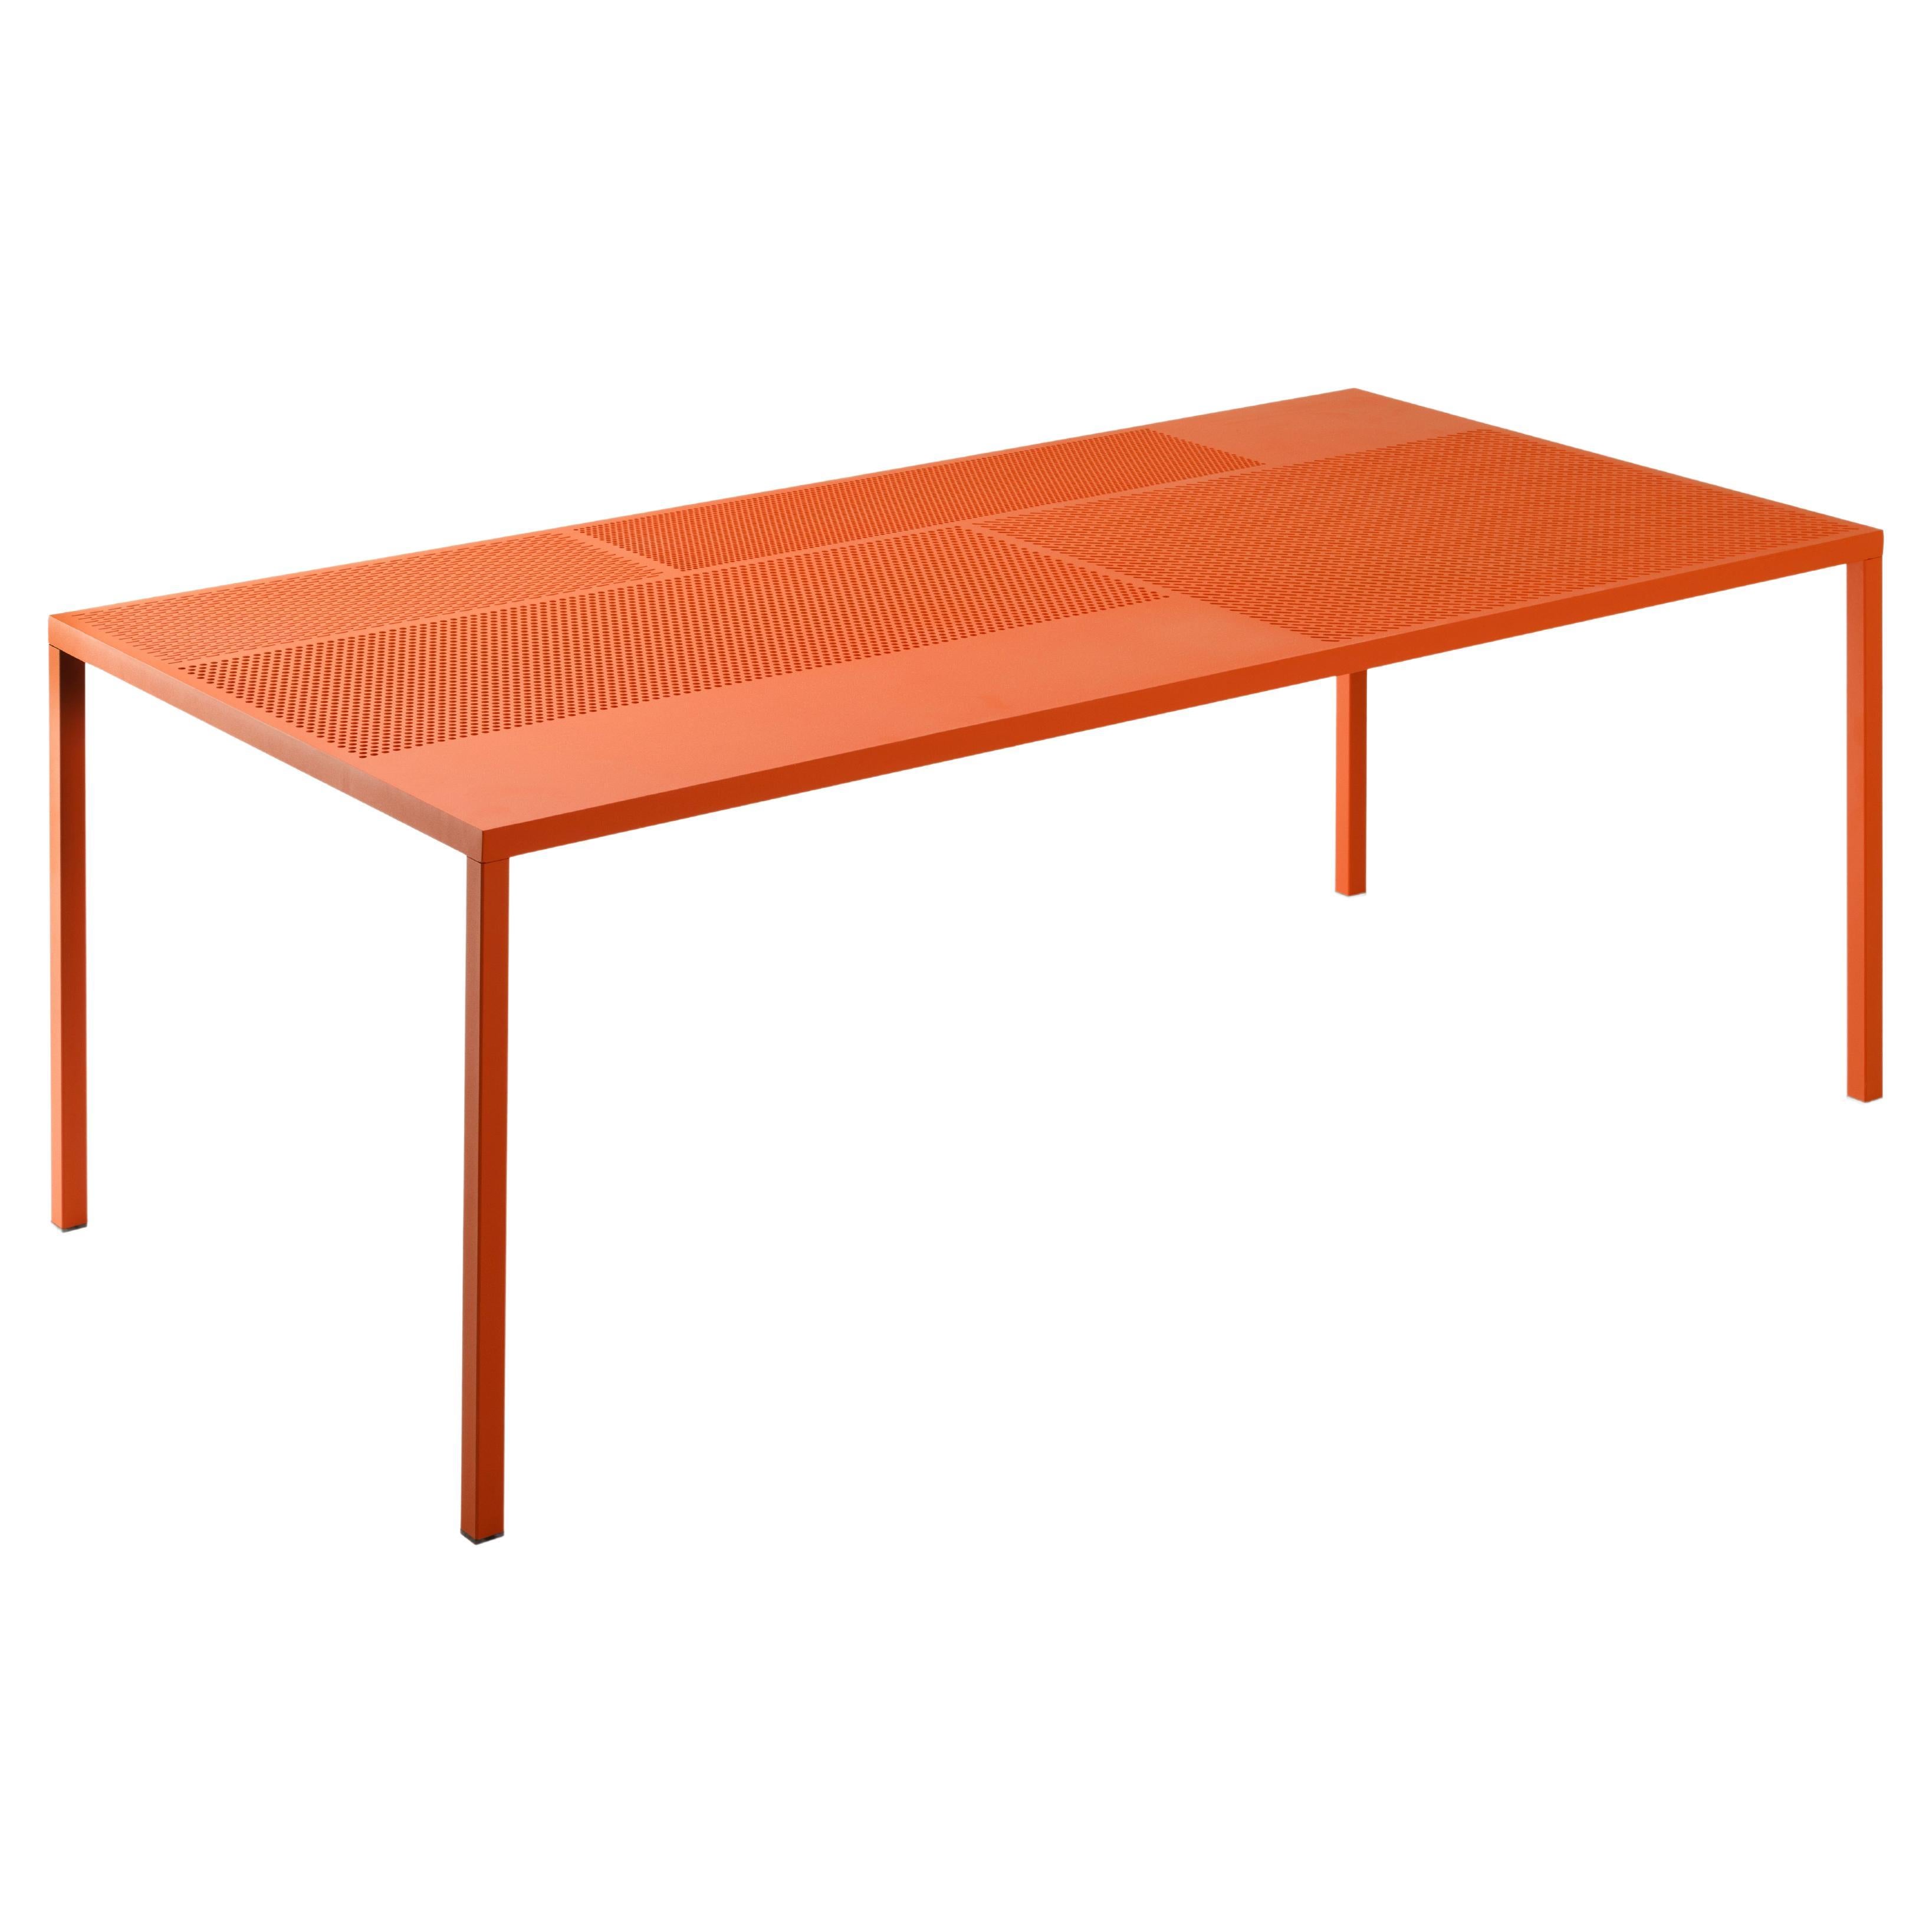 21st Century Modern Perforated Steel Rectangular Table Outdoor Neo Made in Italy